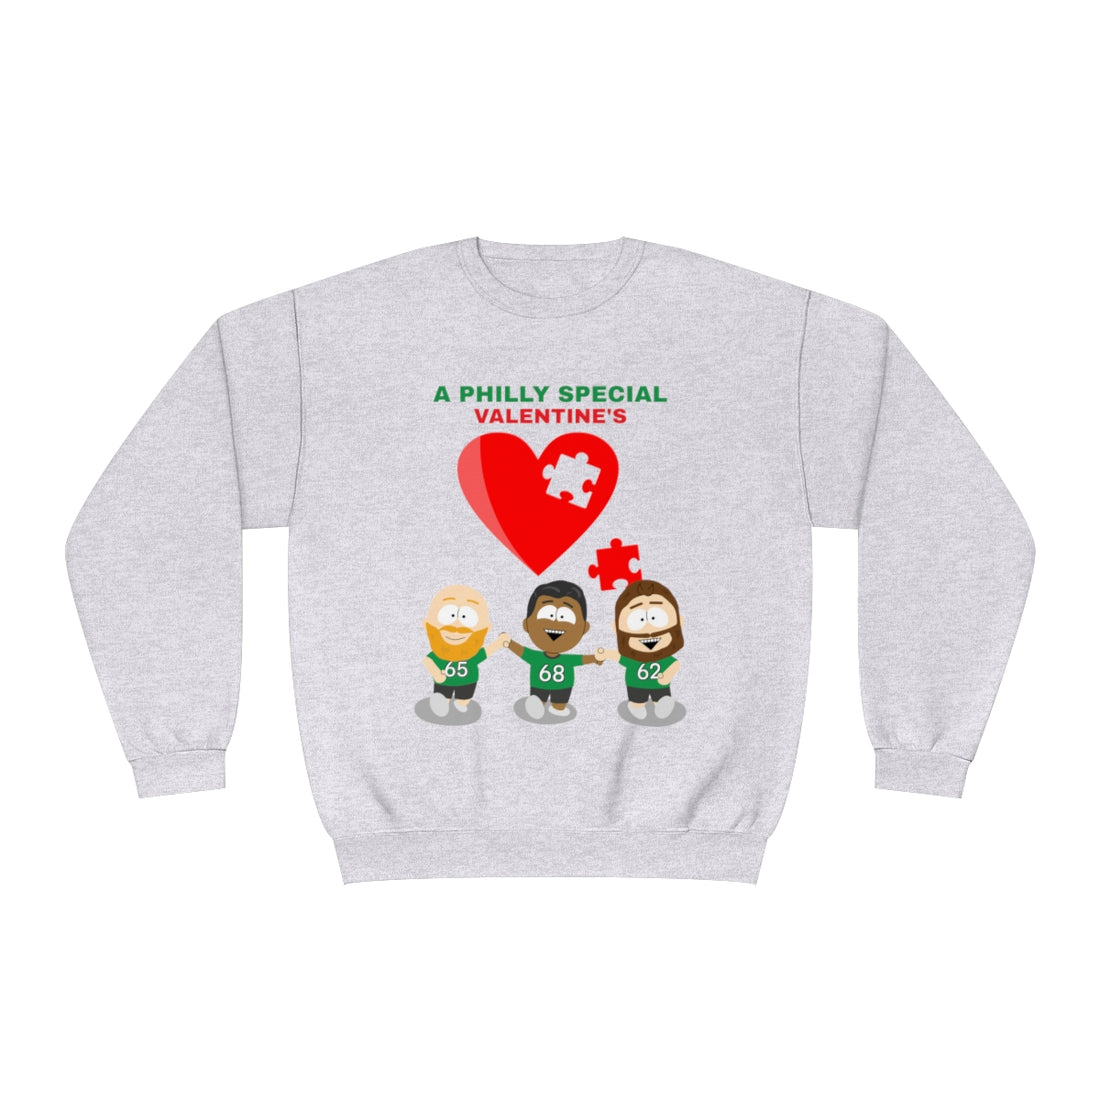 A Philly Special Valentine's Day: Spread the Love with Our Limited-Edition Sweatshirts!